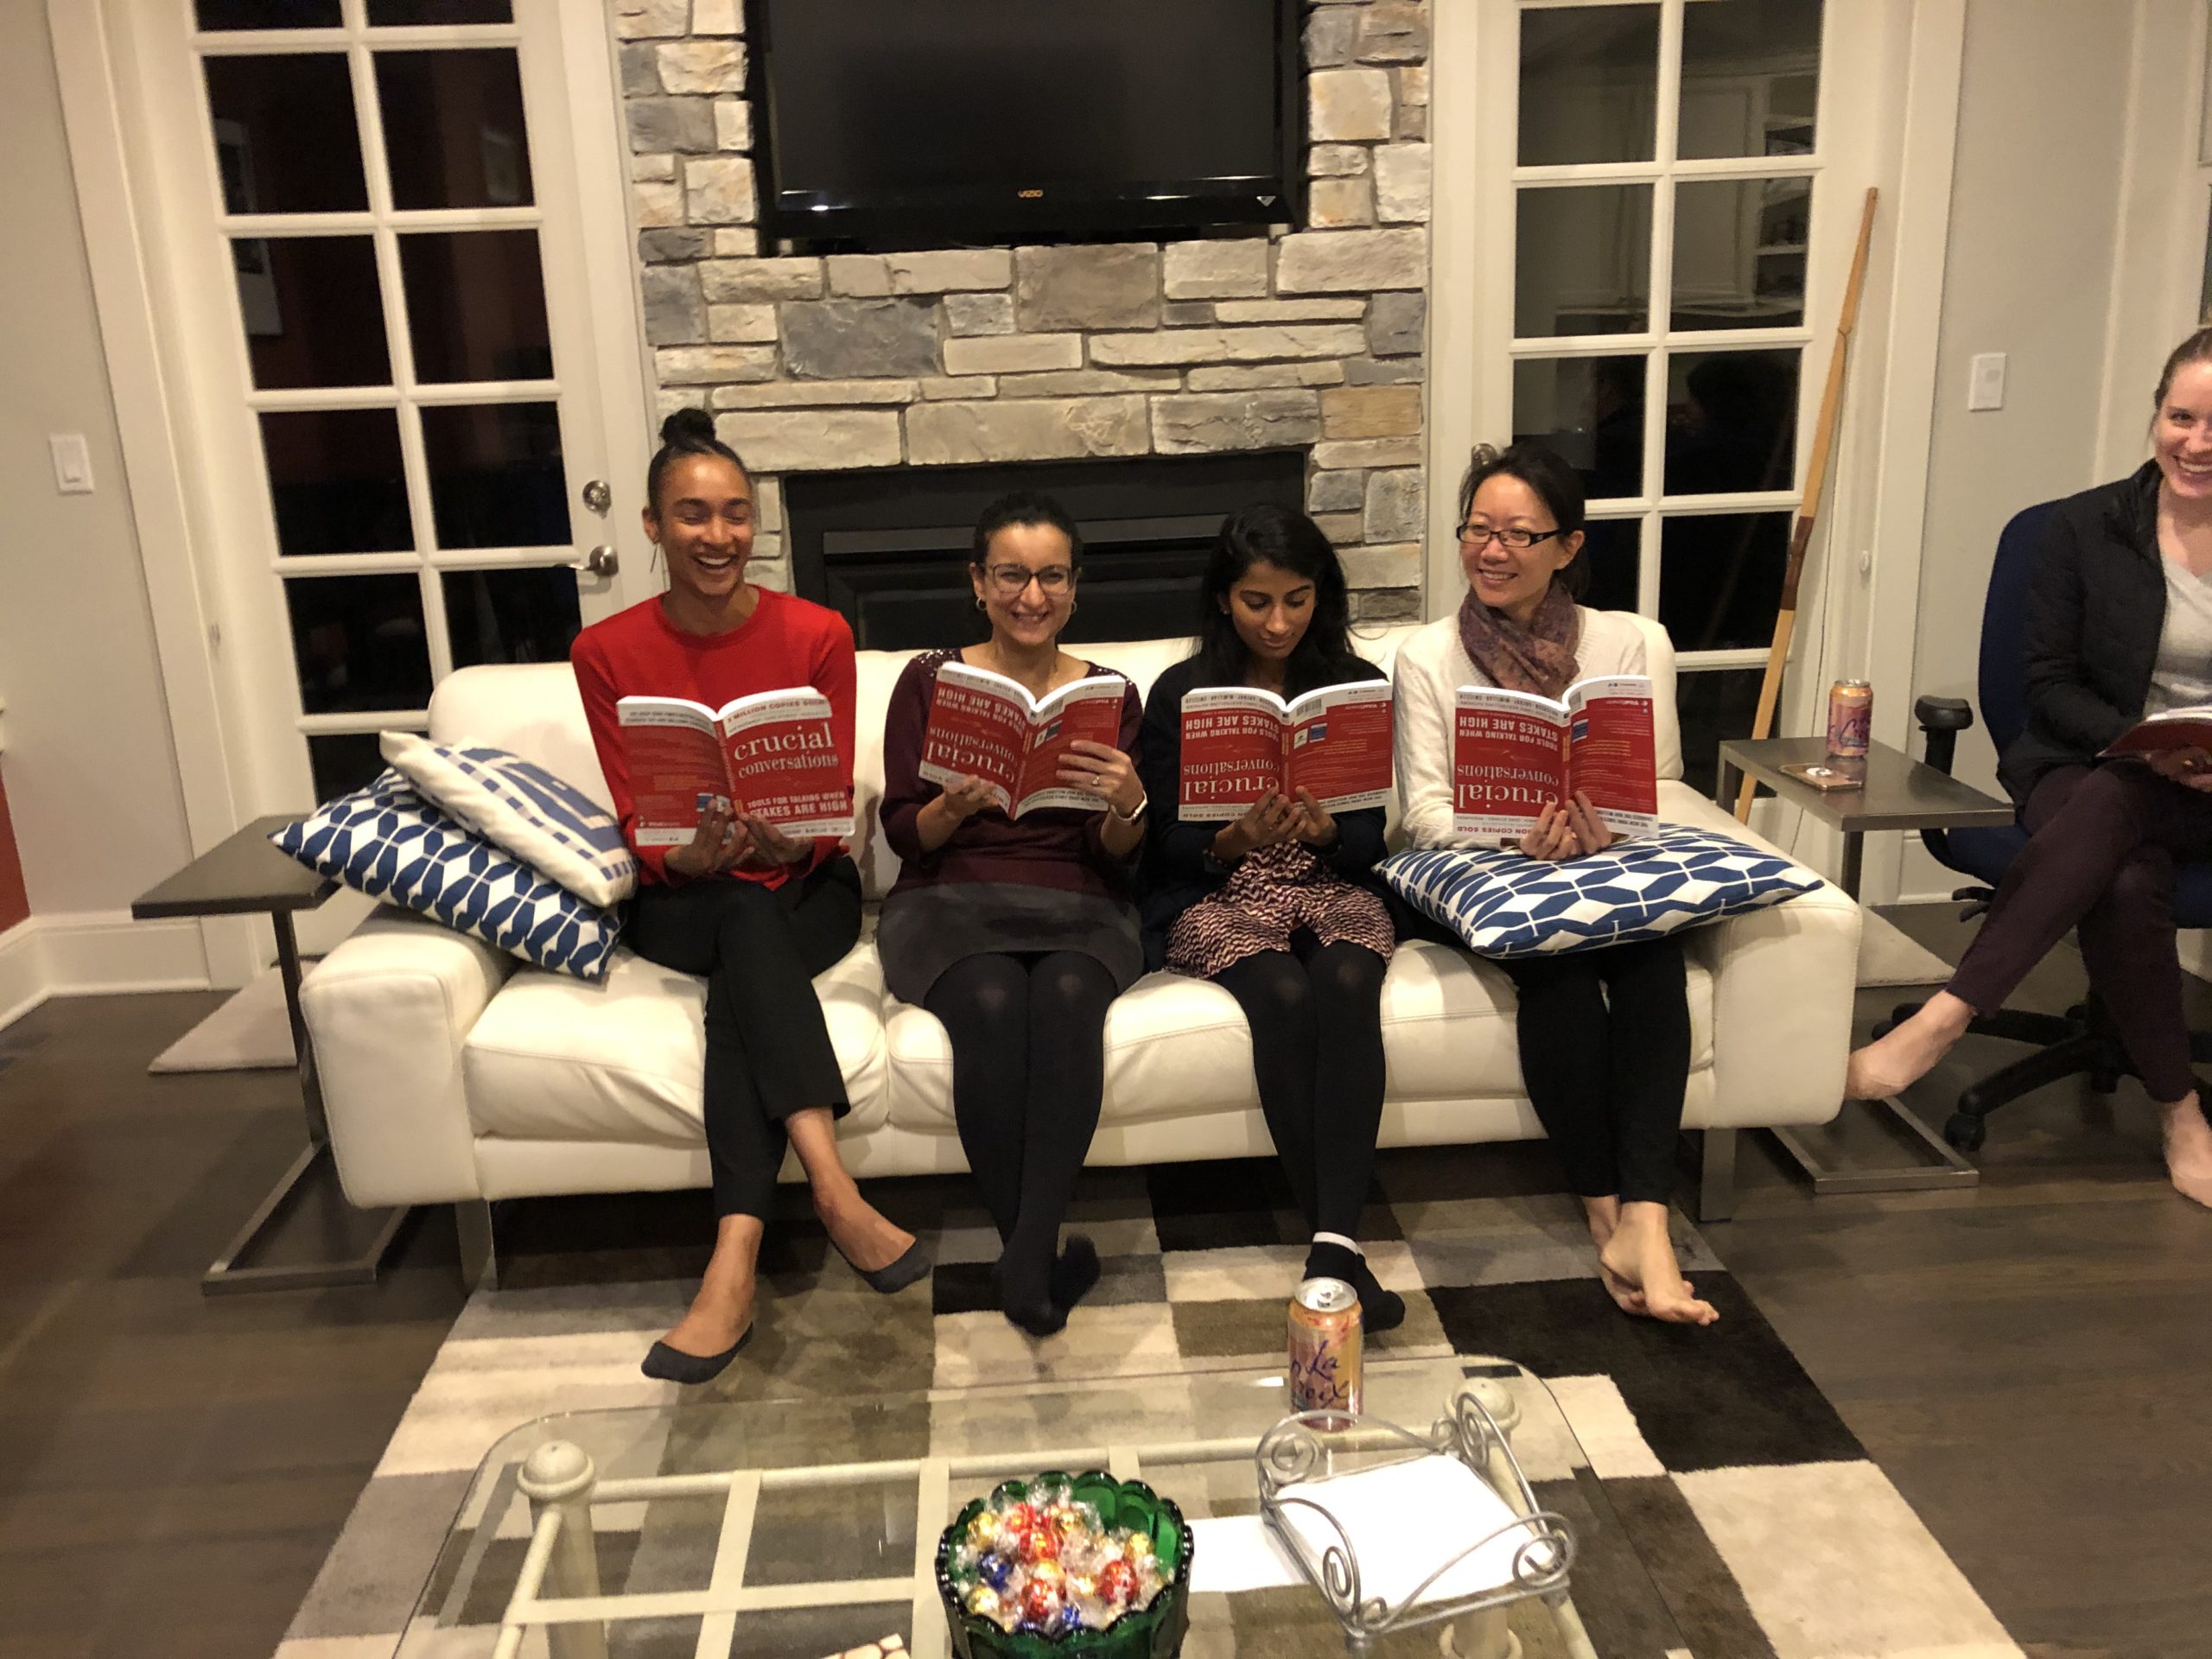 Four women at a Women in Radiology book club event in October 2019.